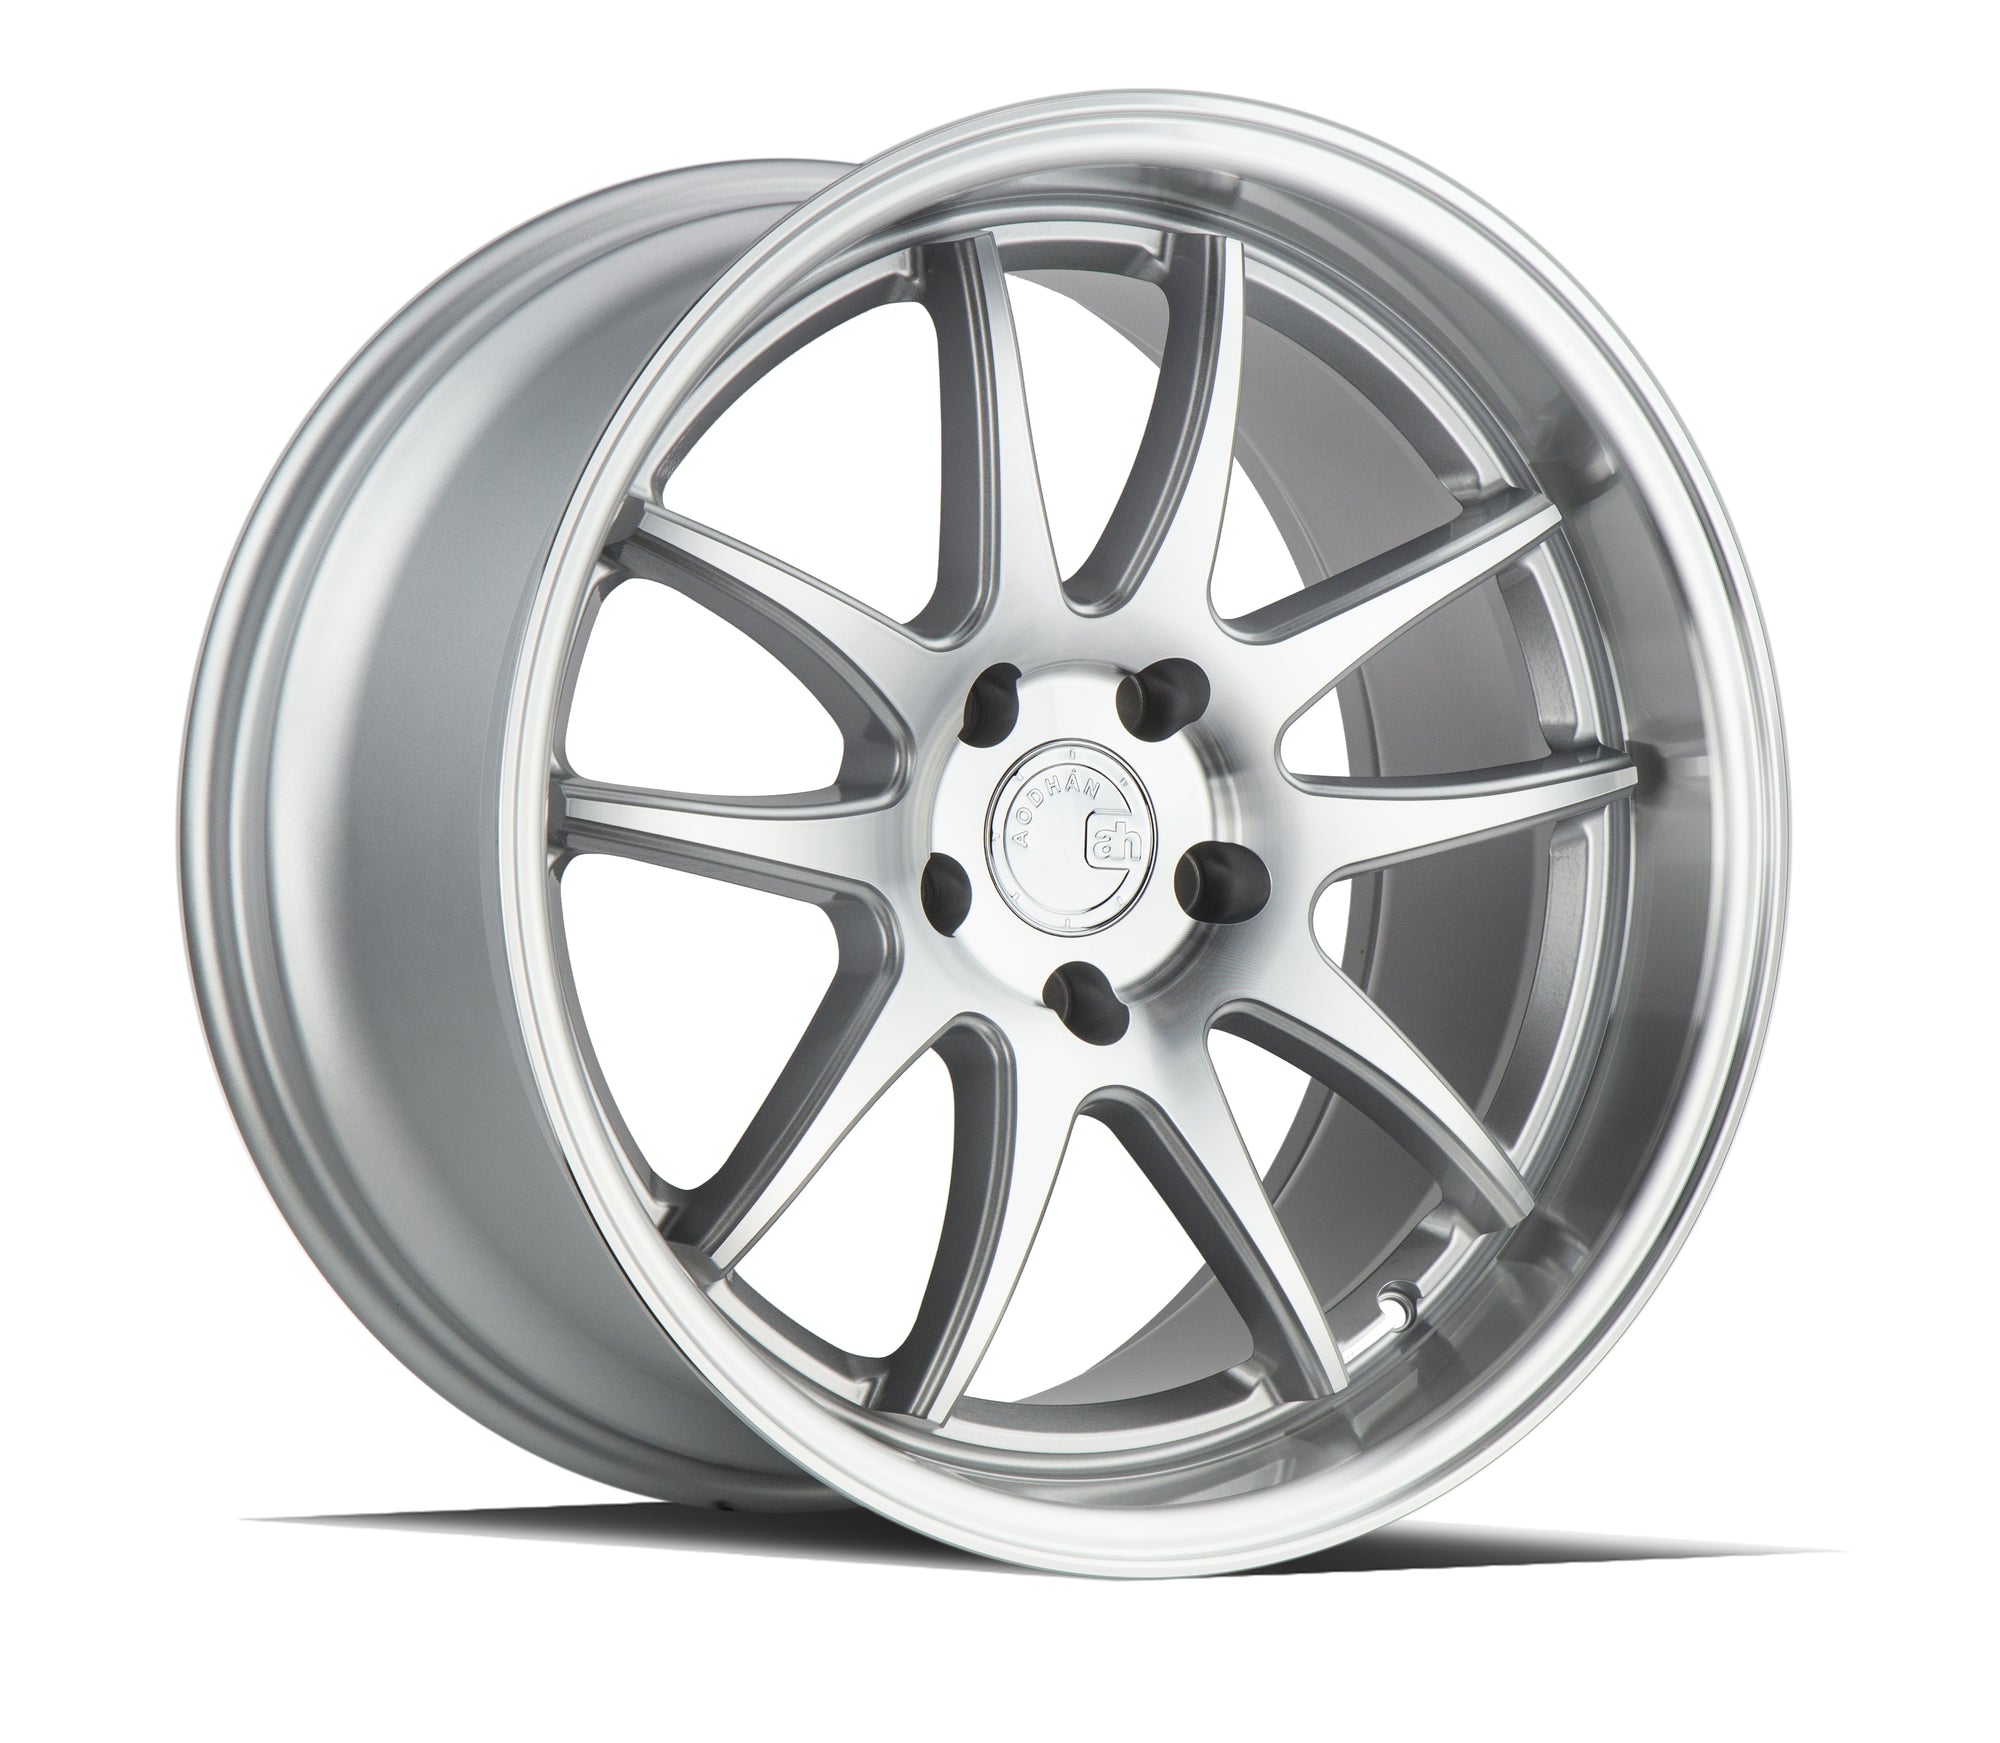 Aodhan DS02 19x9.5 5x114.3 +22 Silver W/Machined Face